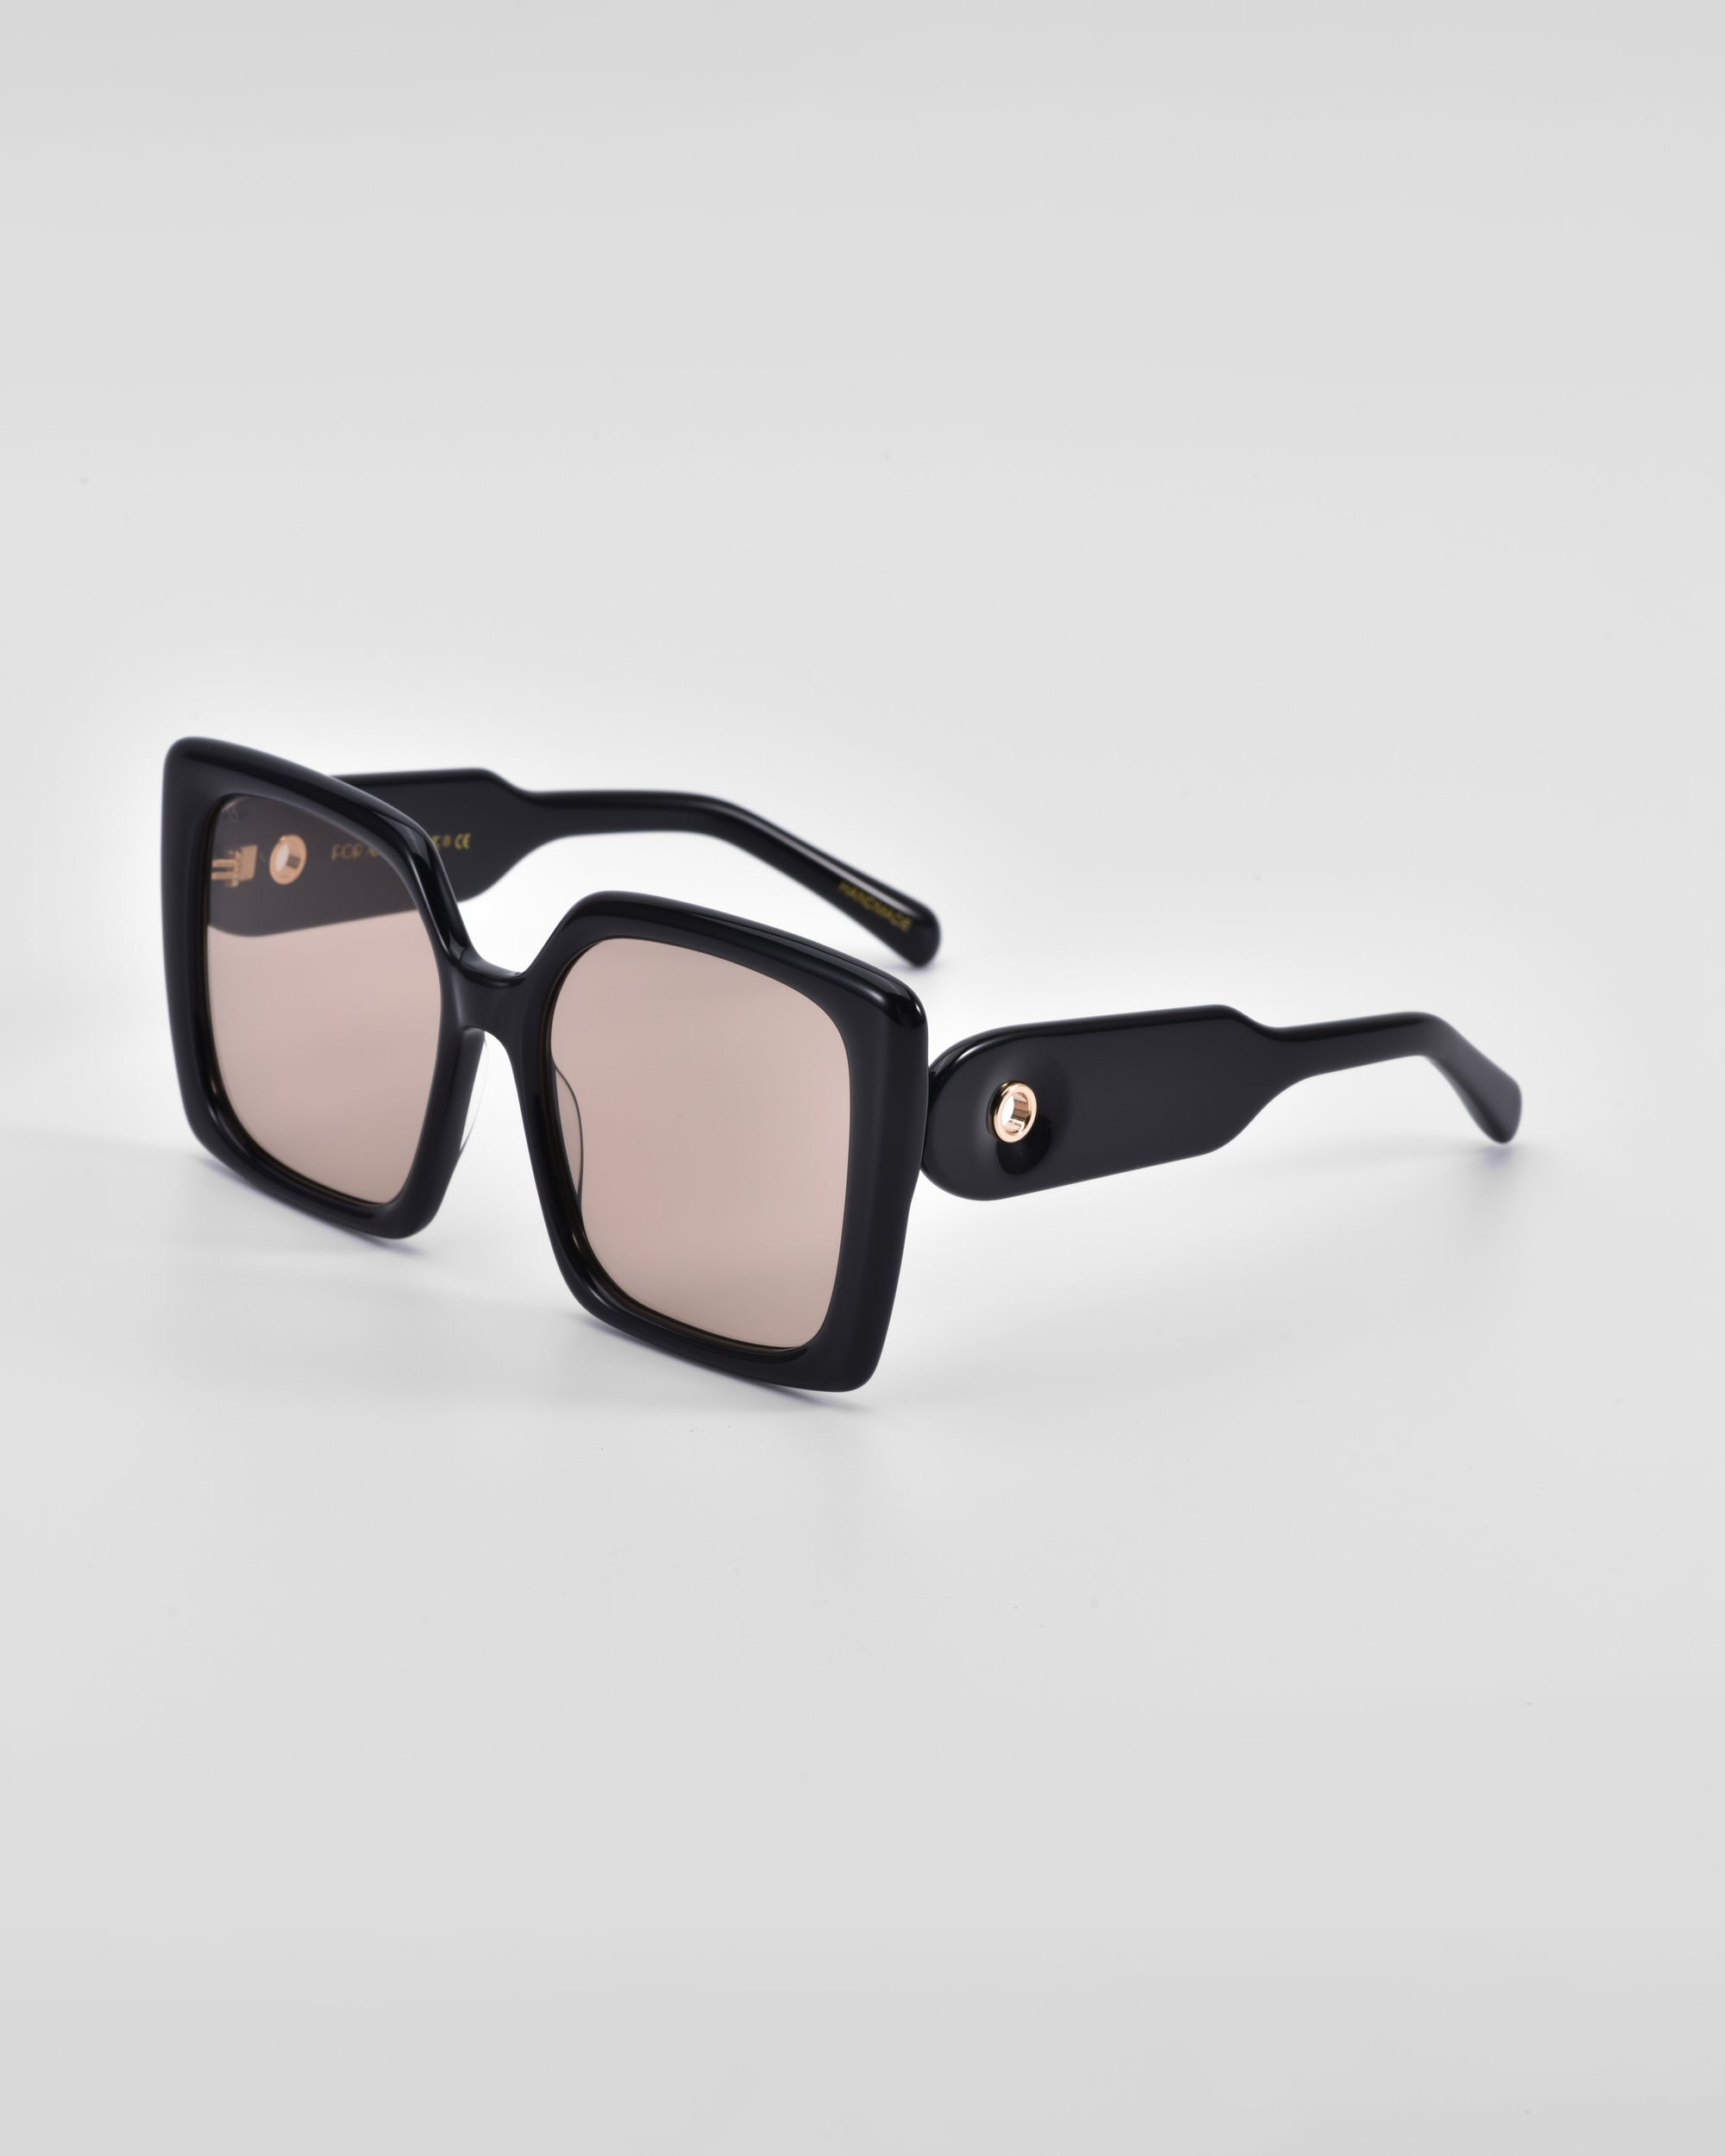 A pair of For Art&#39;s Sake® Eos sunglasses with rectangular black frames and light brown tinted lenses is displayed against a light gray background. The temples feature an 18 karat gold circular ornament near the hinges.